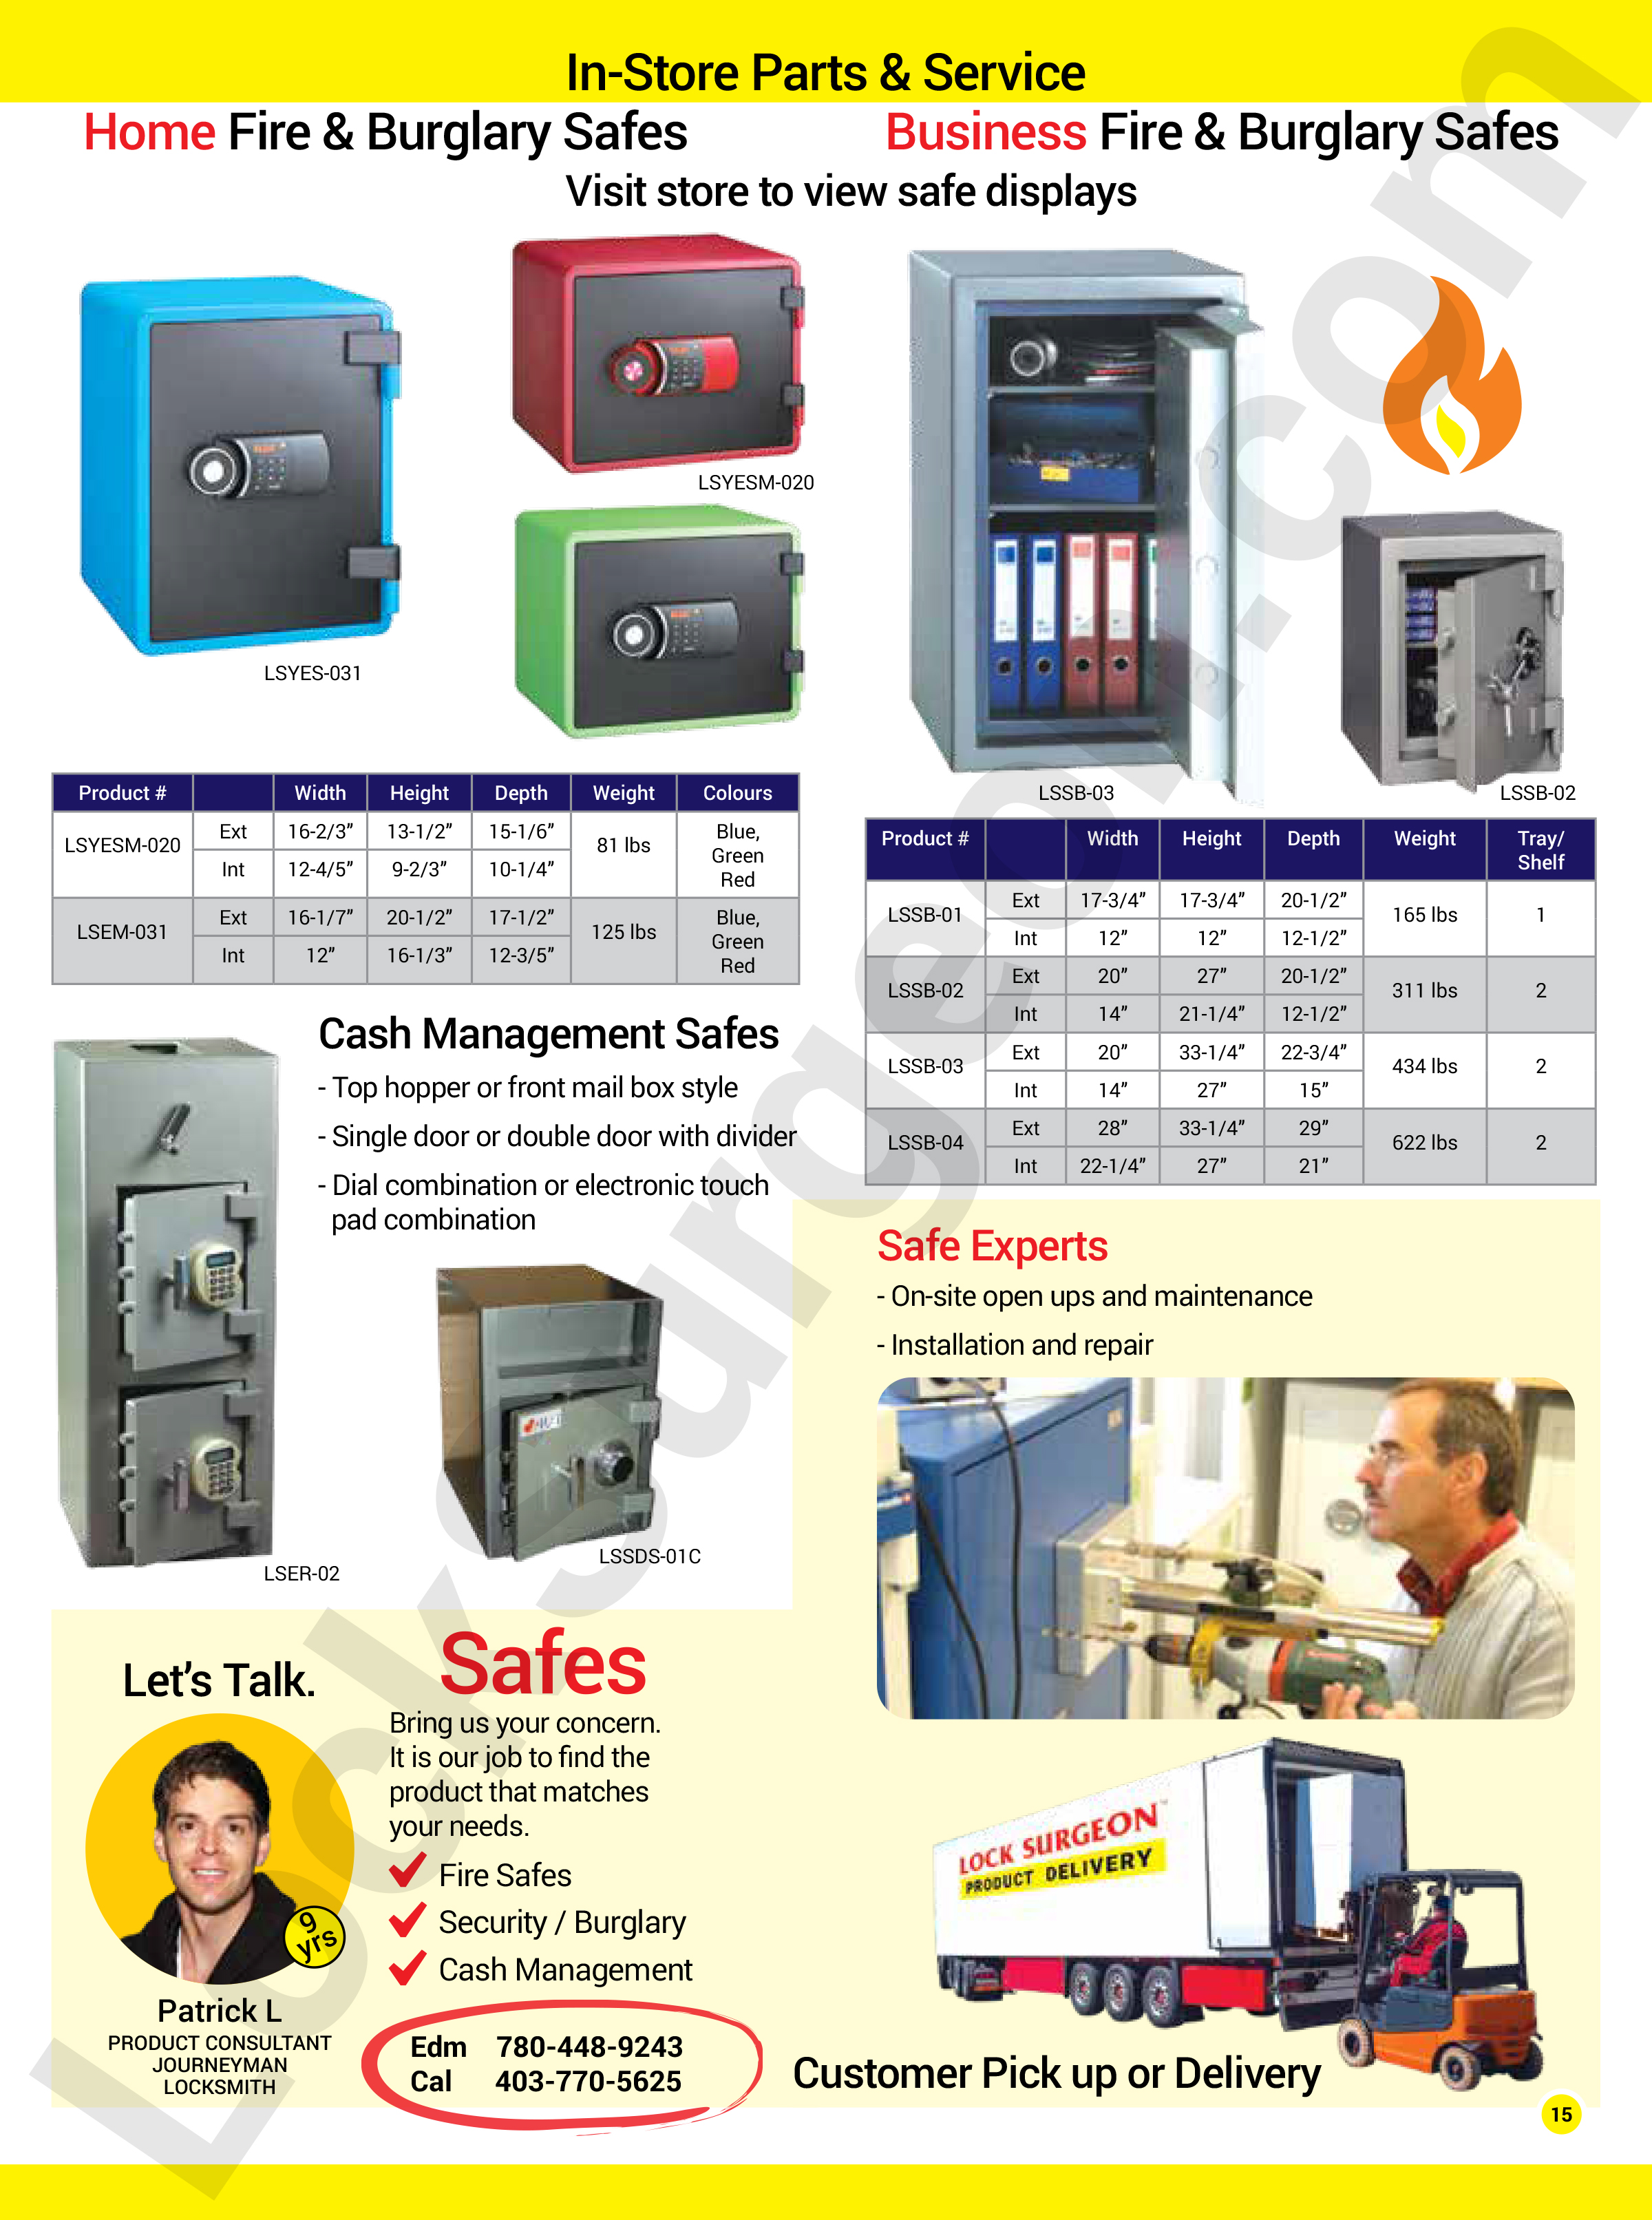 Edmonton South Lock Surgeon fire, burglary and cash management safe sales and repairs.